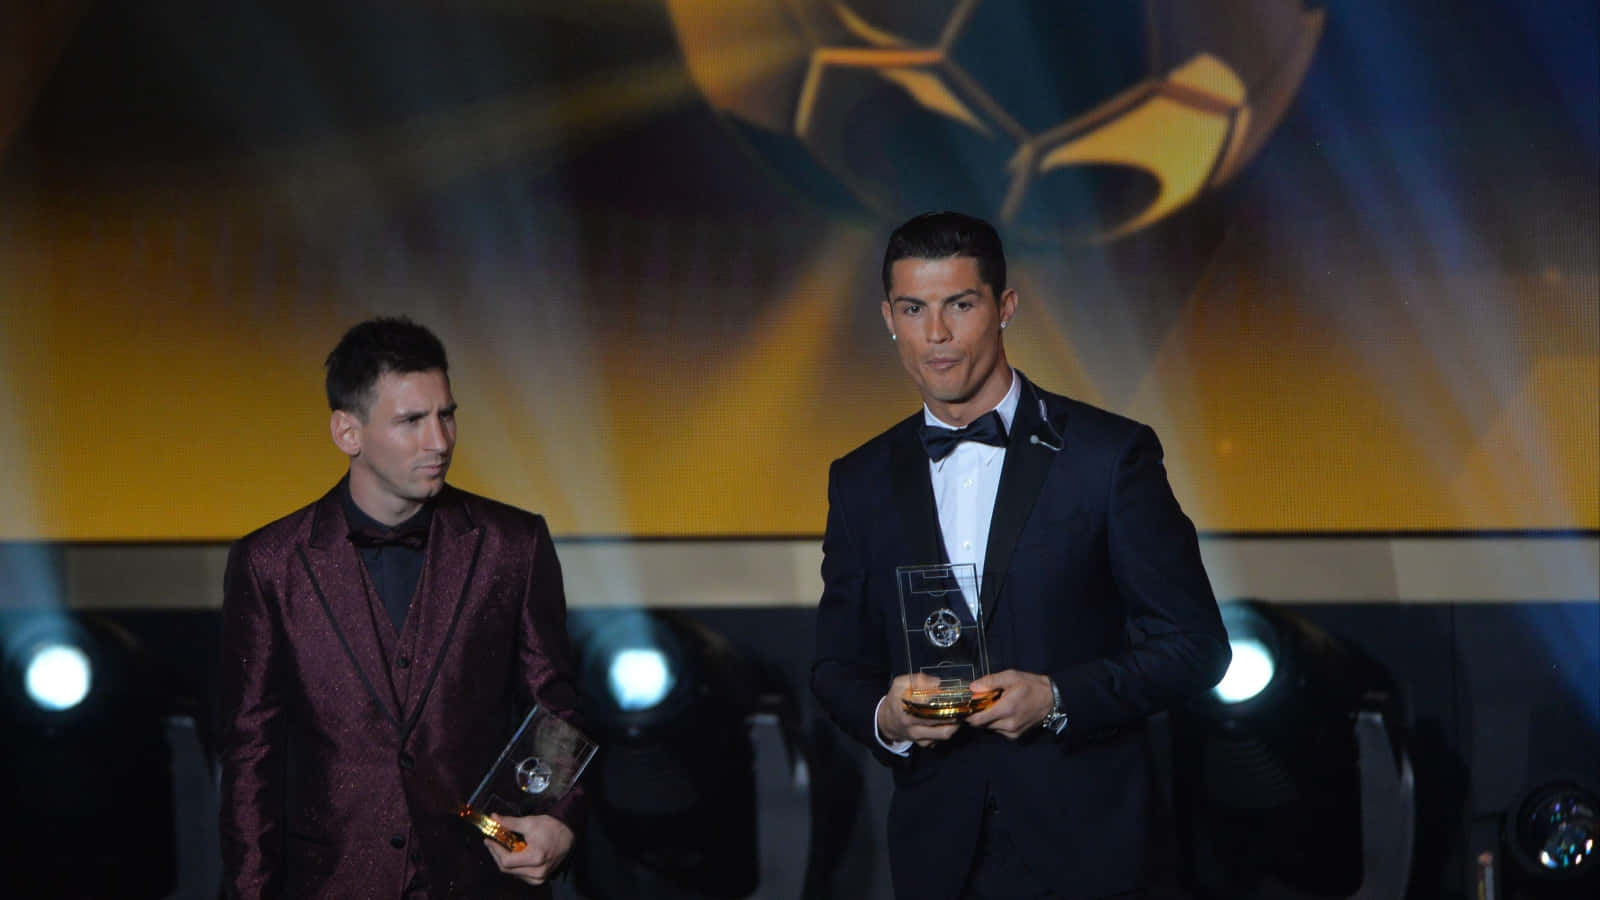 Lionel Messi With His Ballon D'or Award Wallpaper